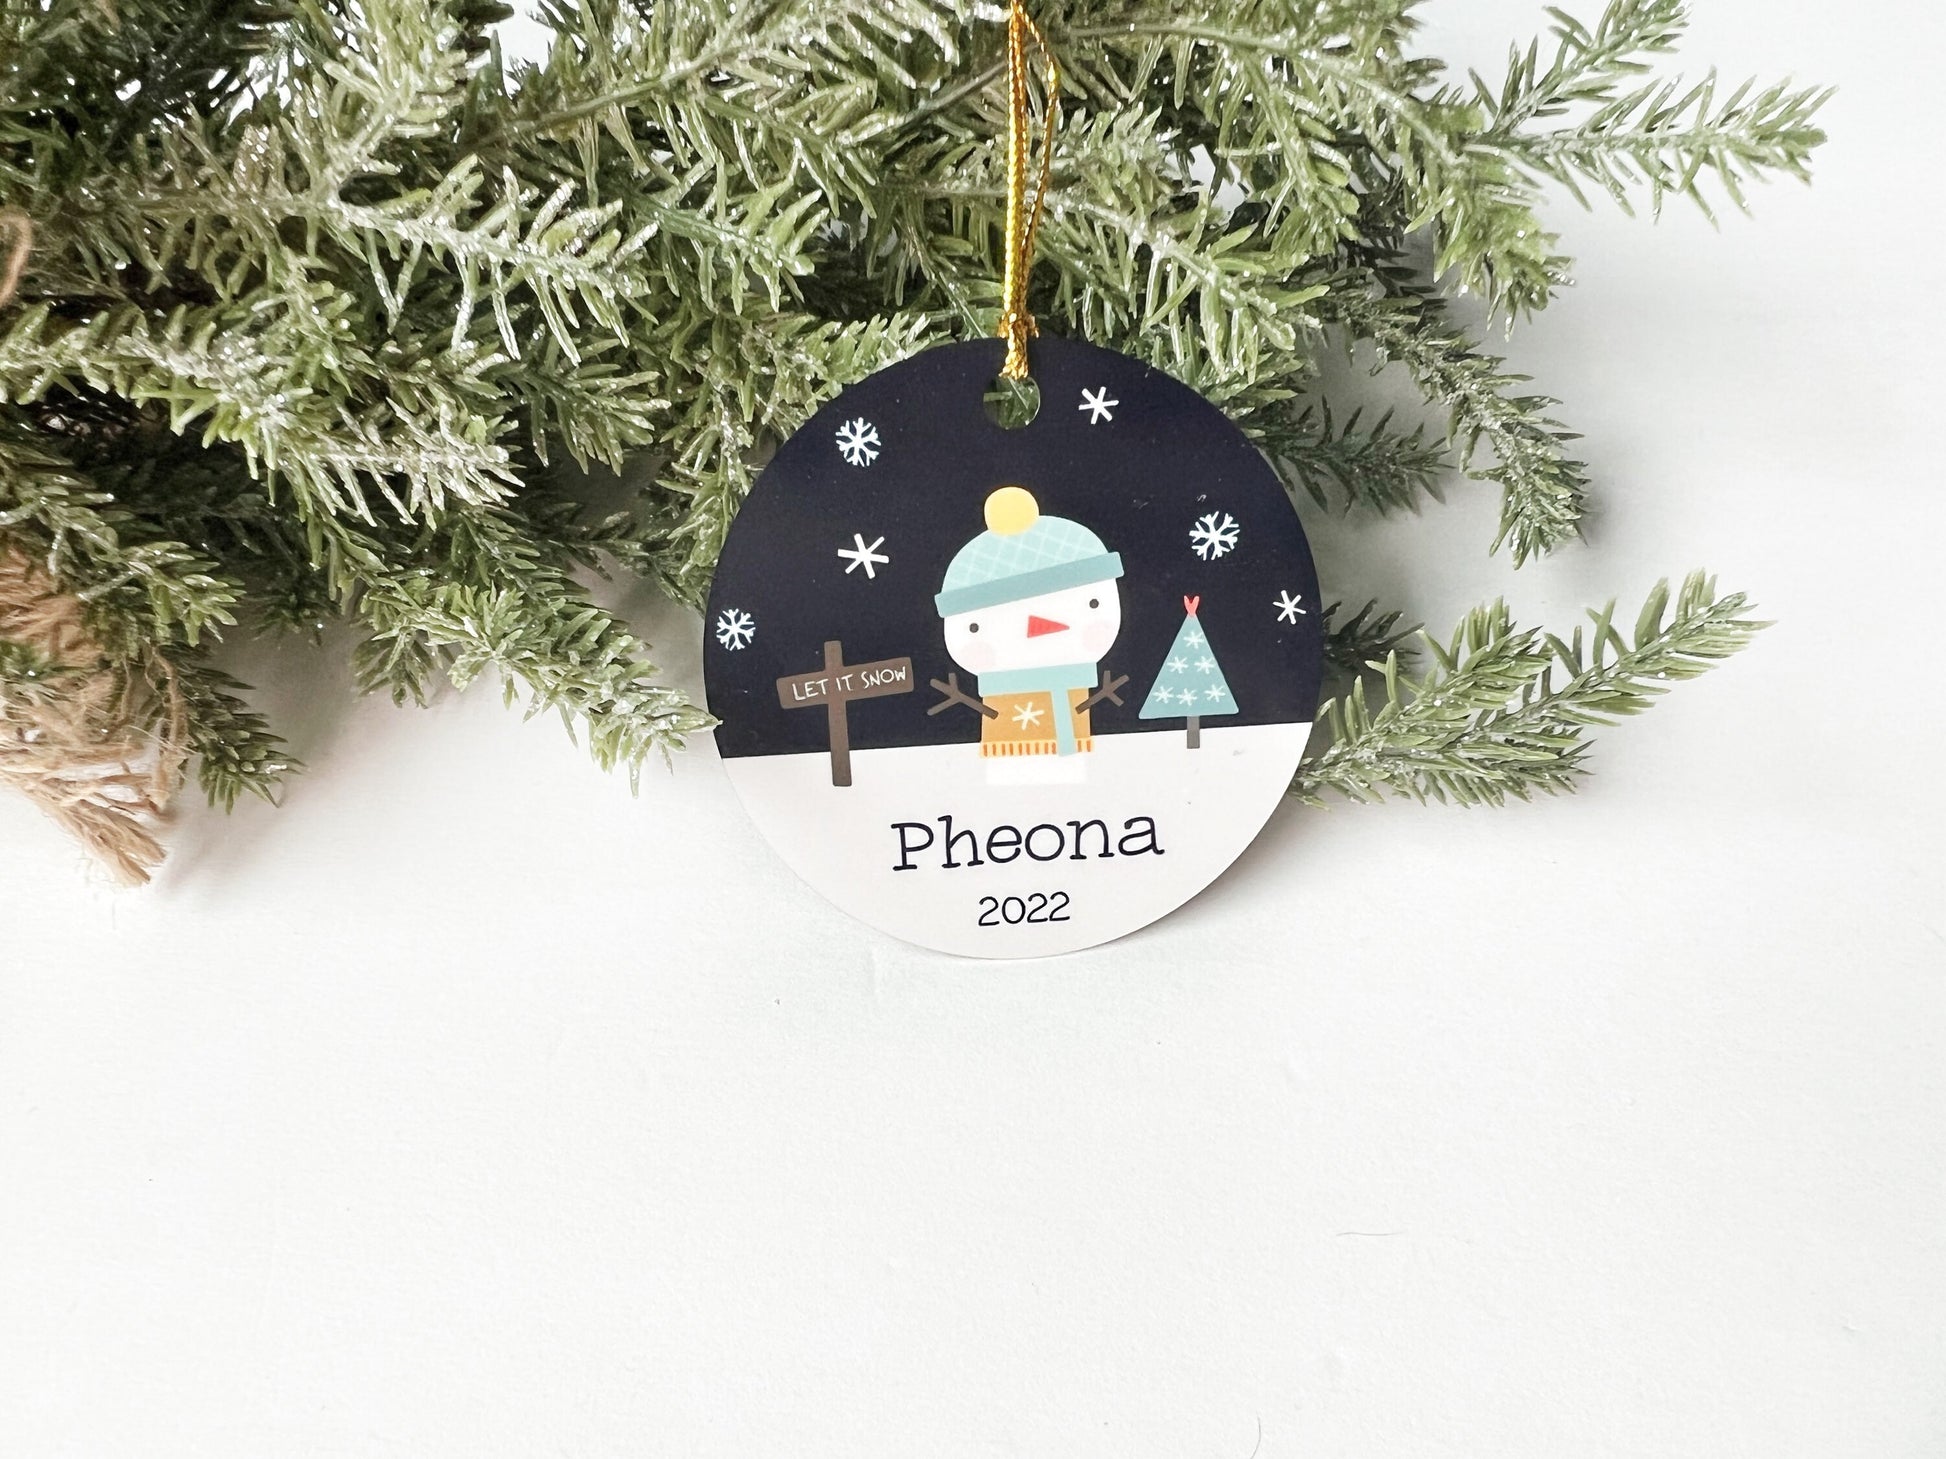 Personalized Snowman Ornament, Christmas Ornament for Kids, Gift for Kids